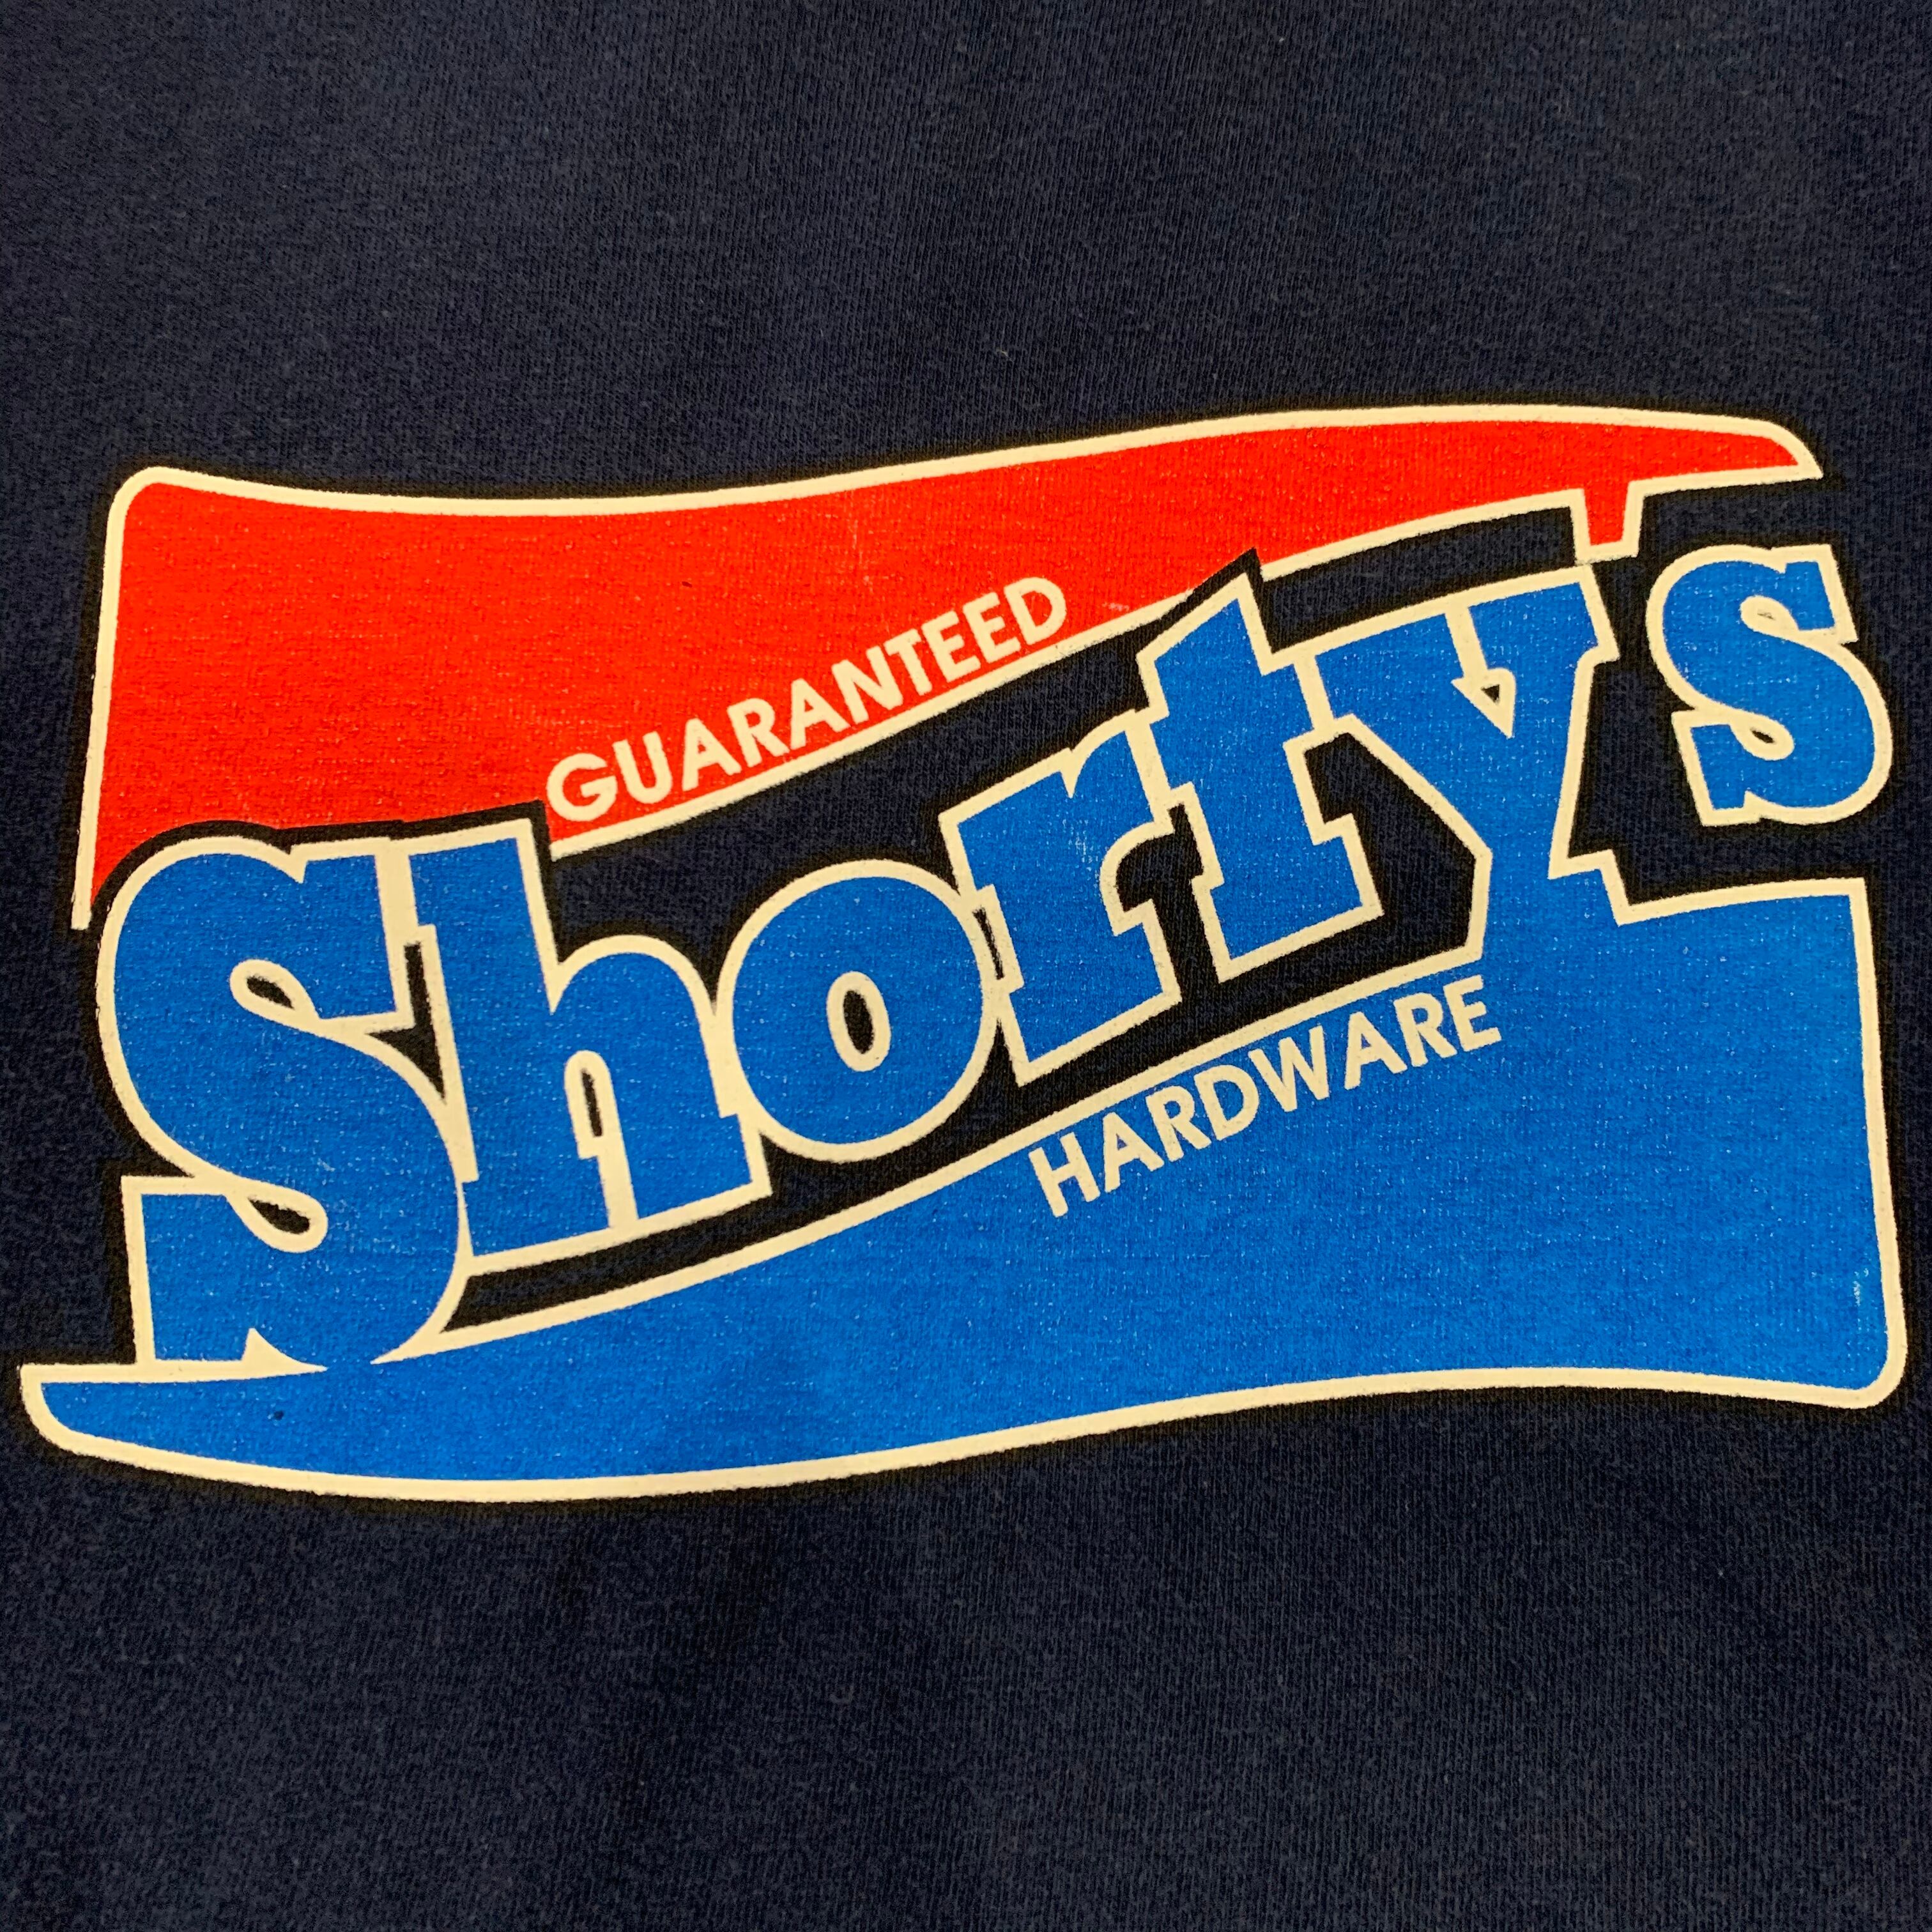 90s shorty's T-shirt | What'z up